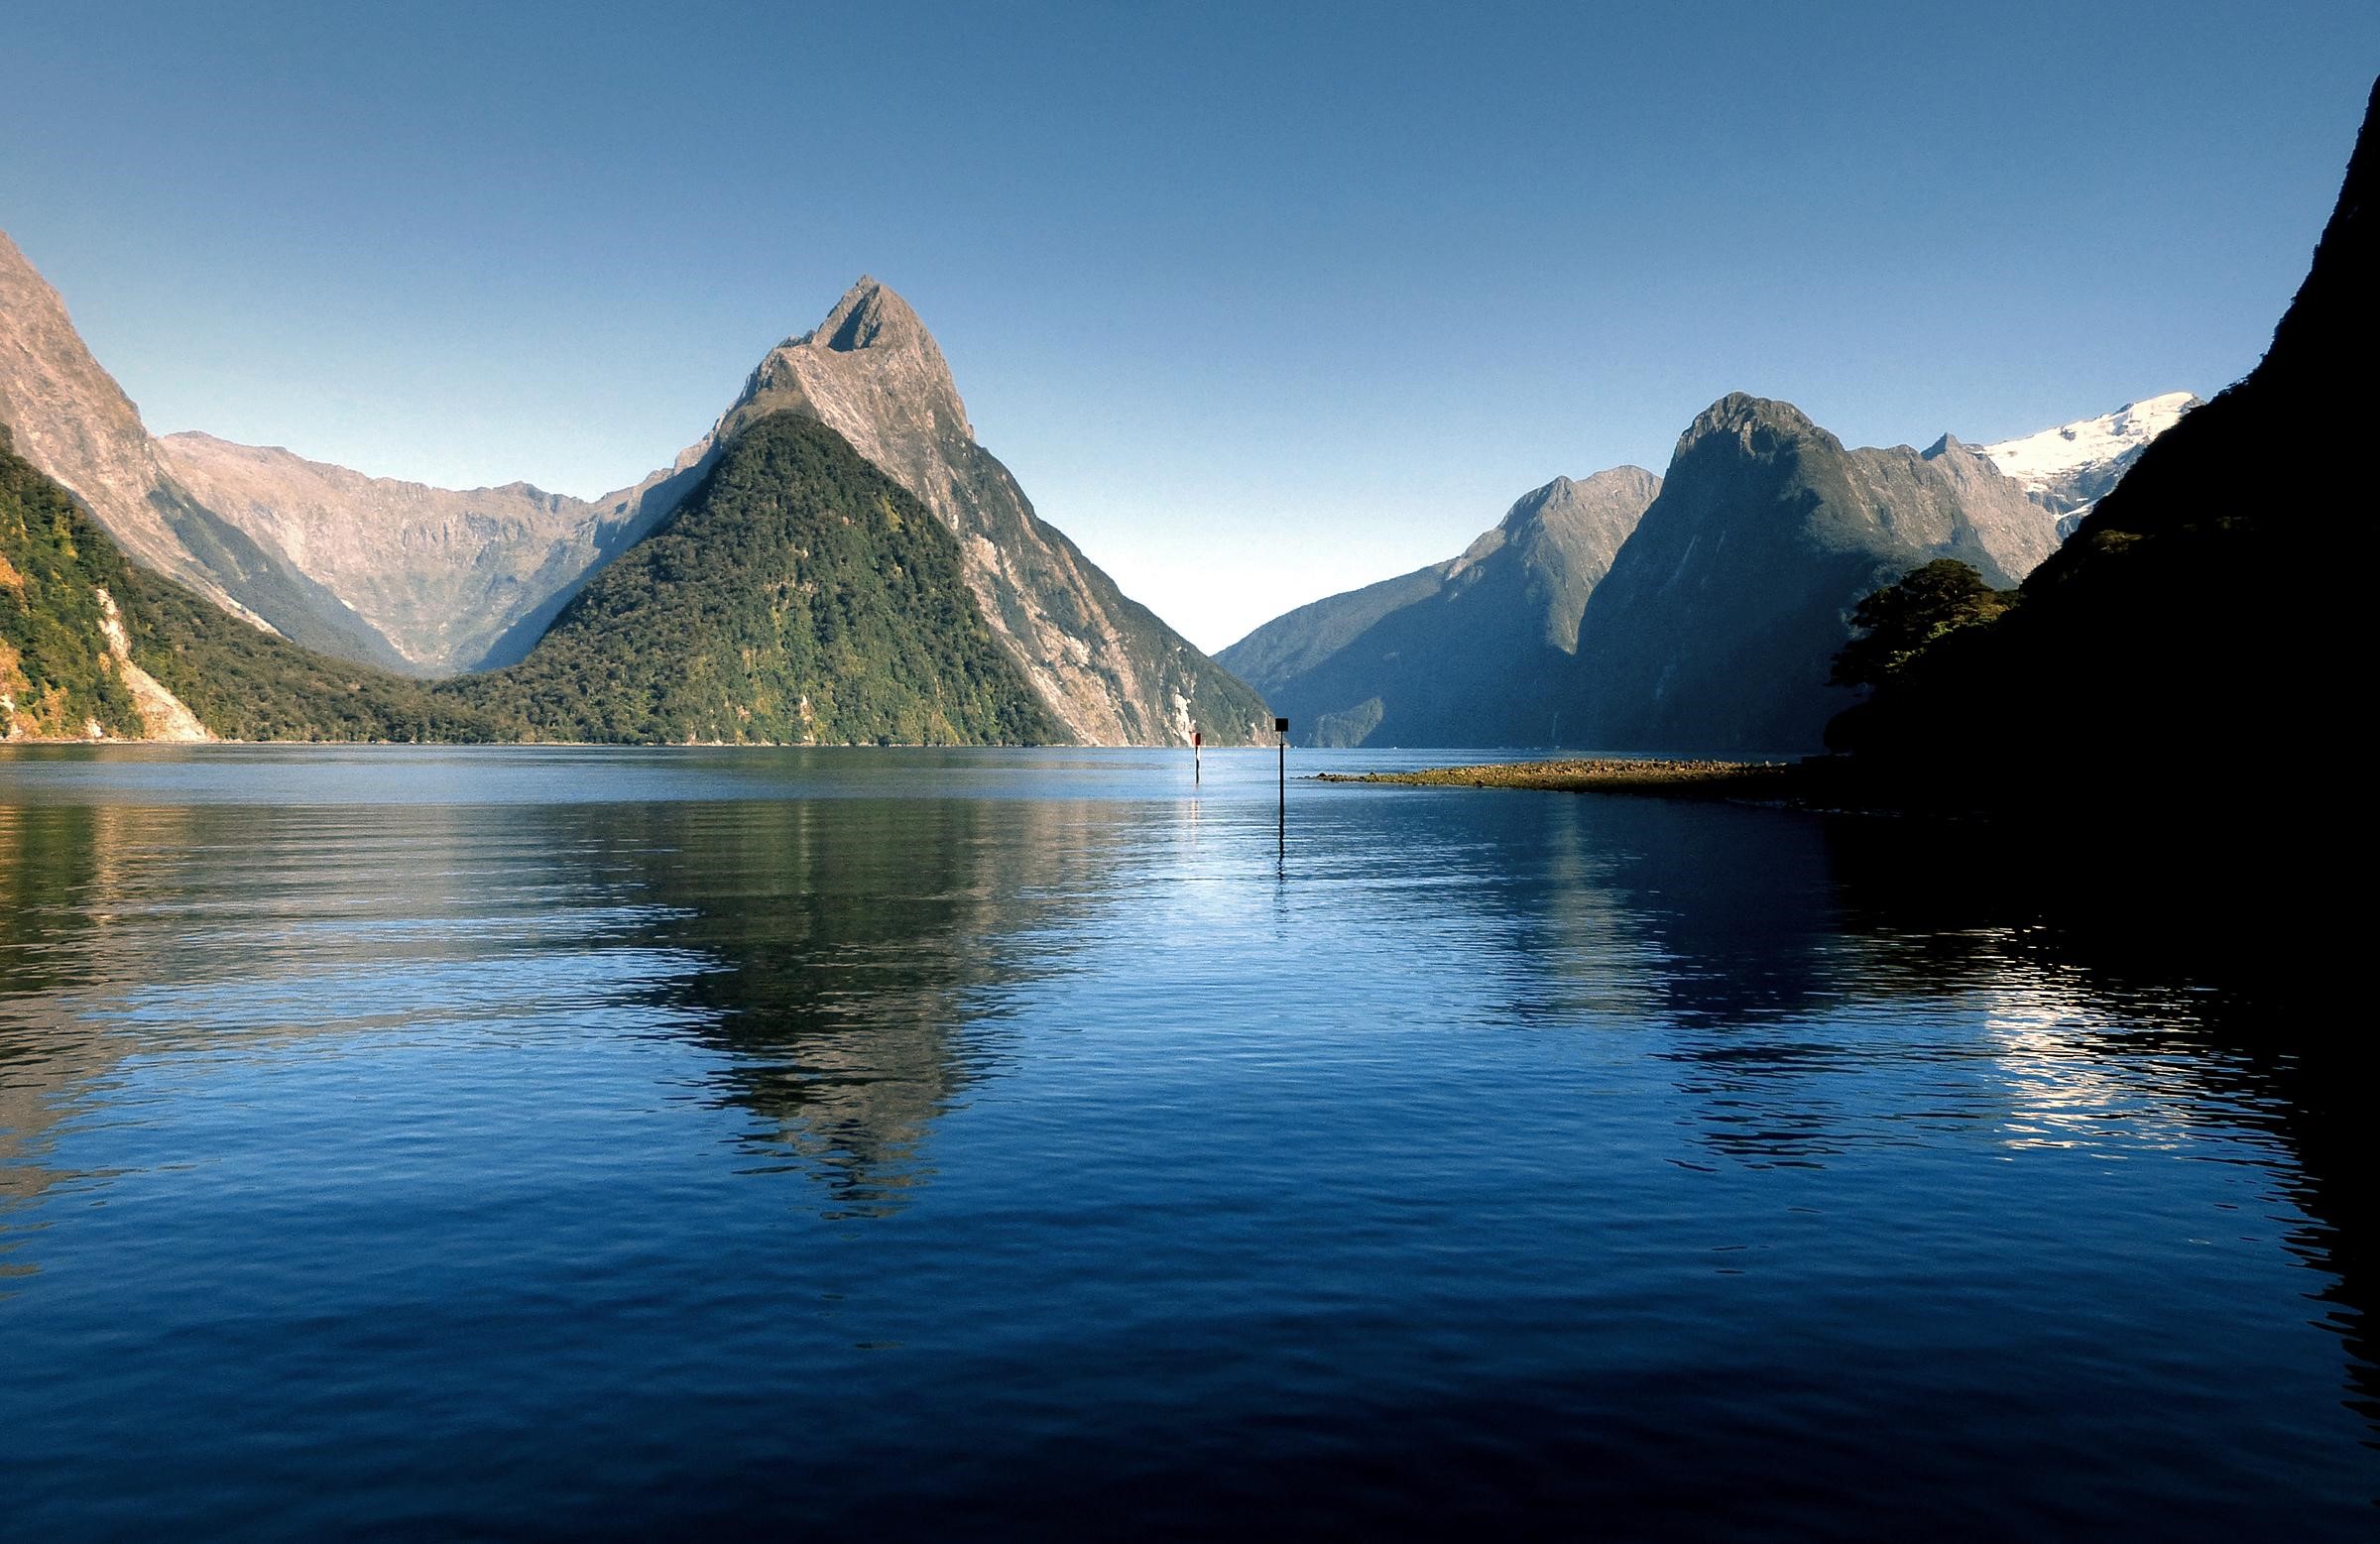 Traveling to Milford sound